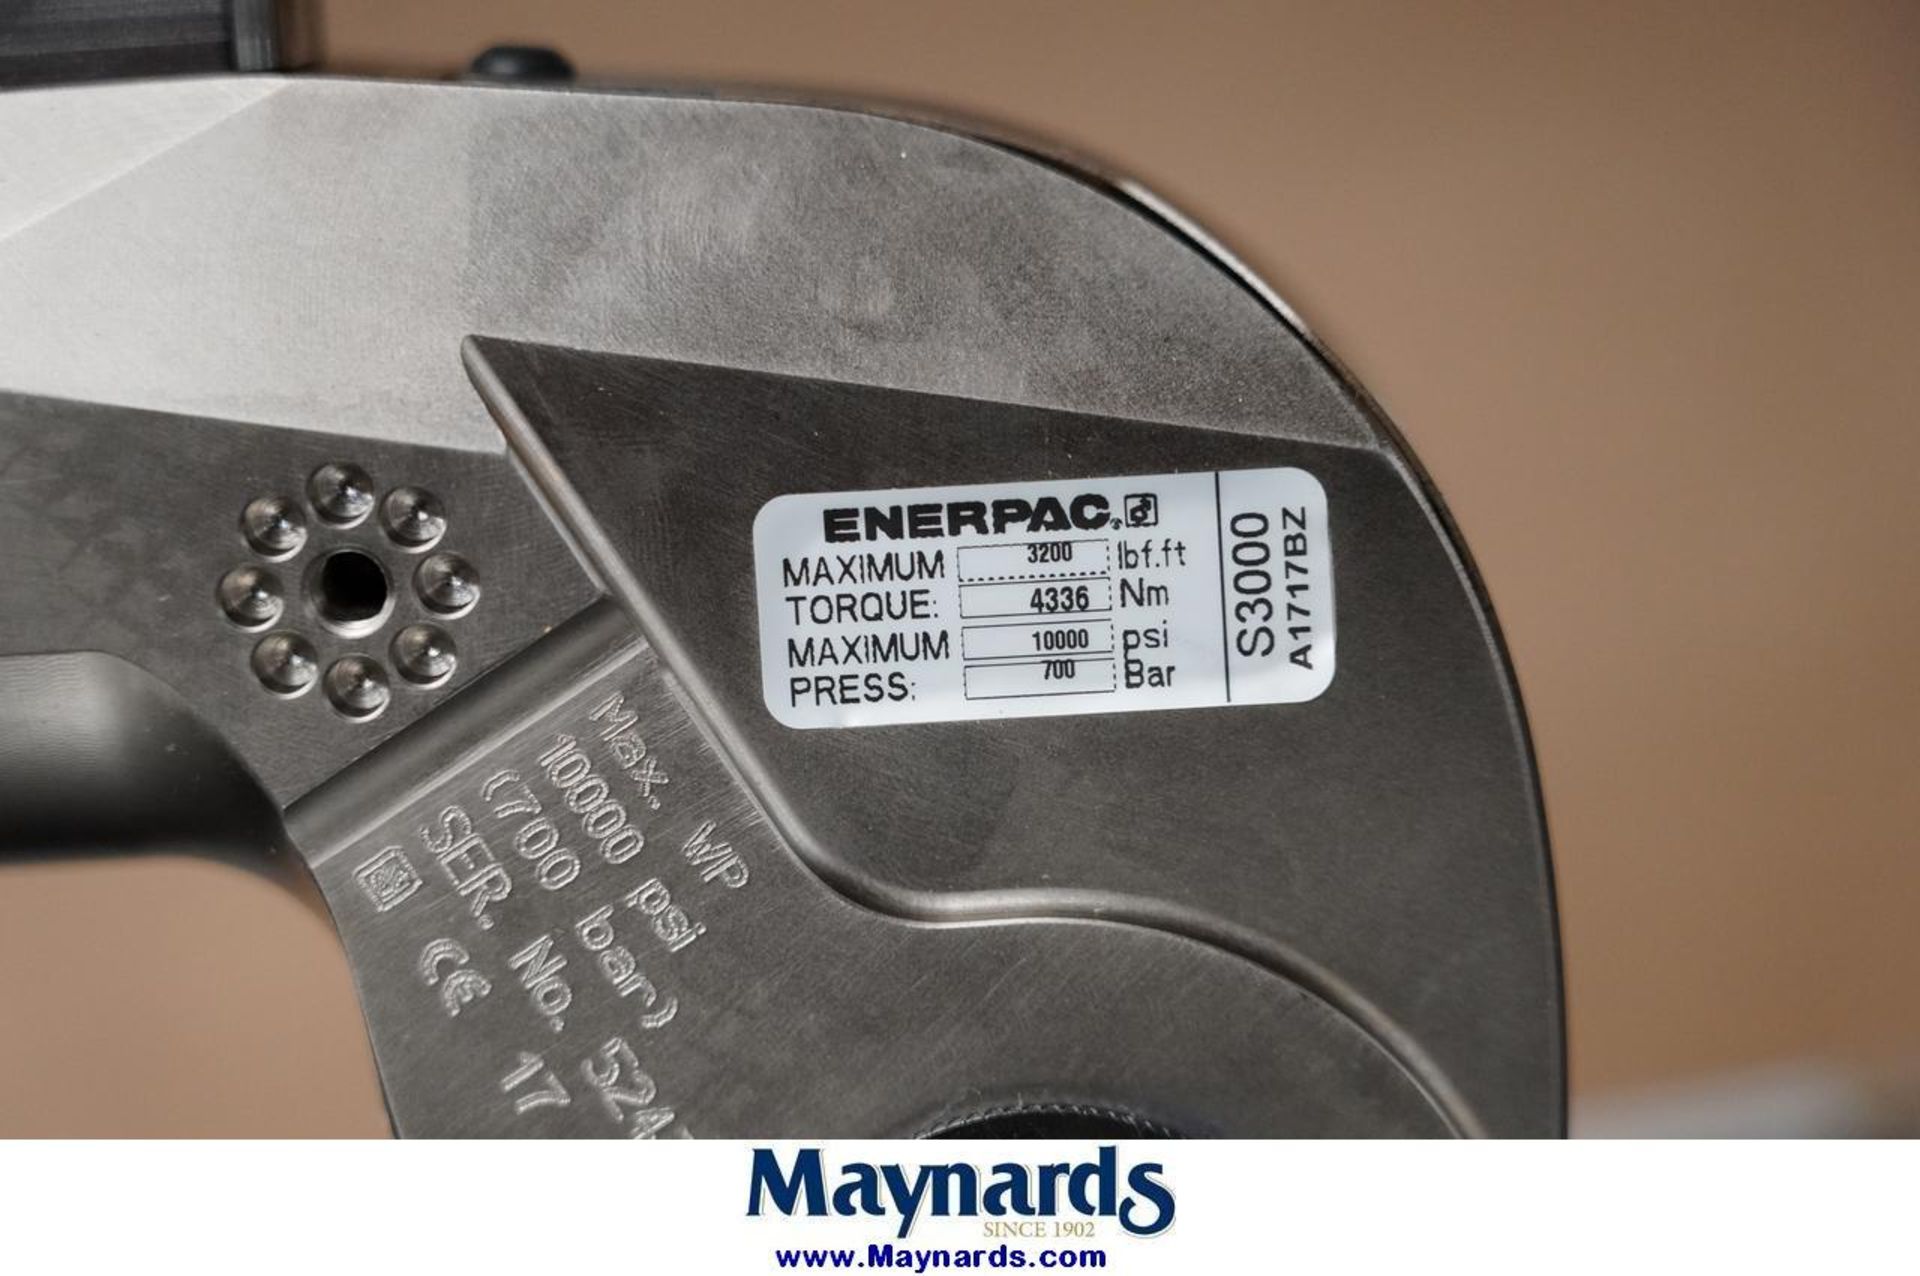 Enerpac S3000X Square Drive Hydraulic Torque Wrench - Image 5 of 8